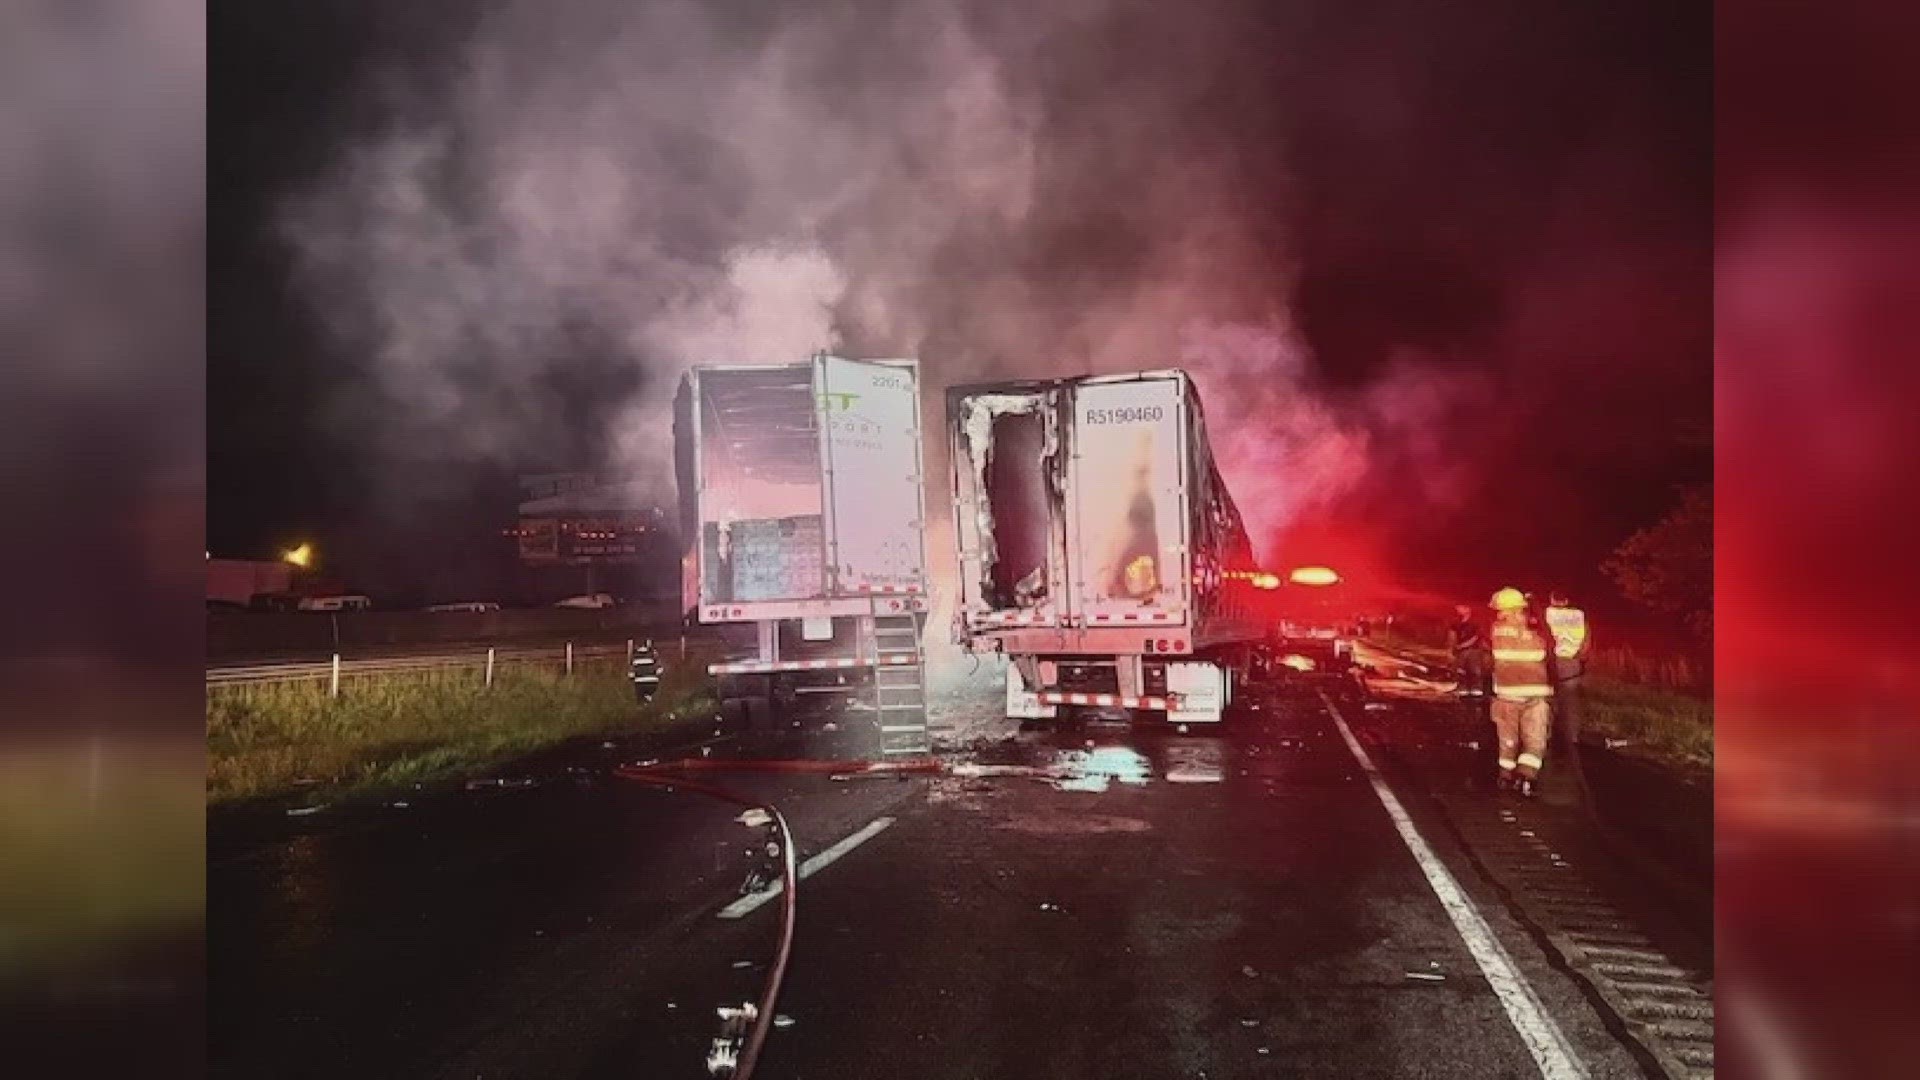 All lanes of I-65 South near Austin, Indiana are blocked after a deadly crash involving three semi-trucks.